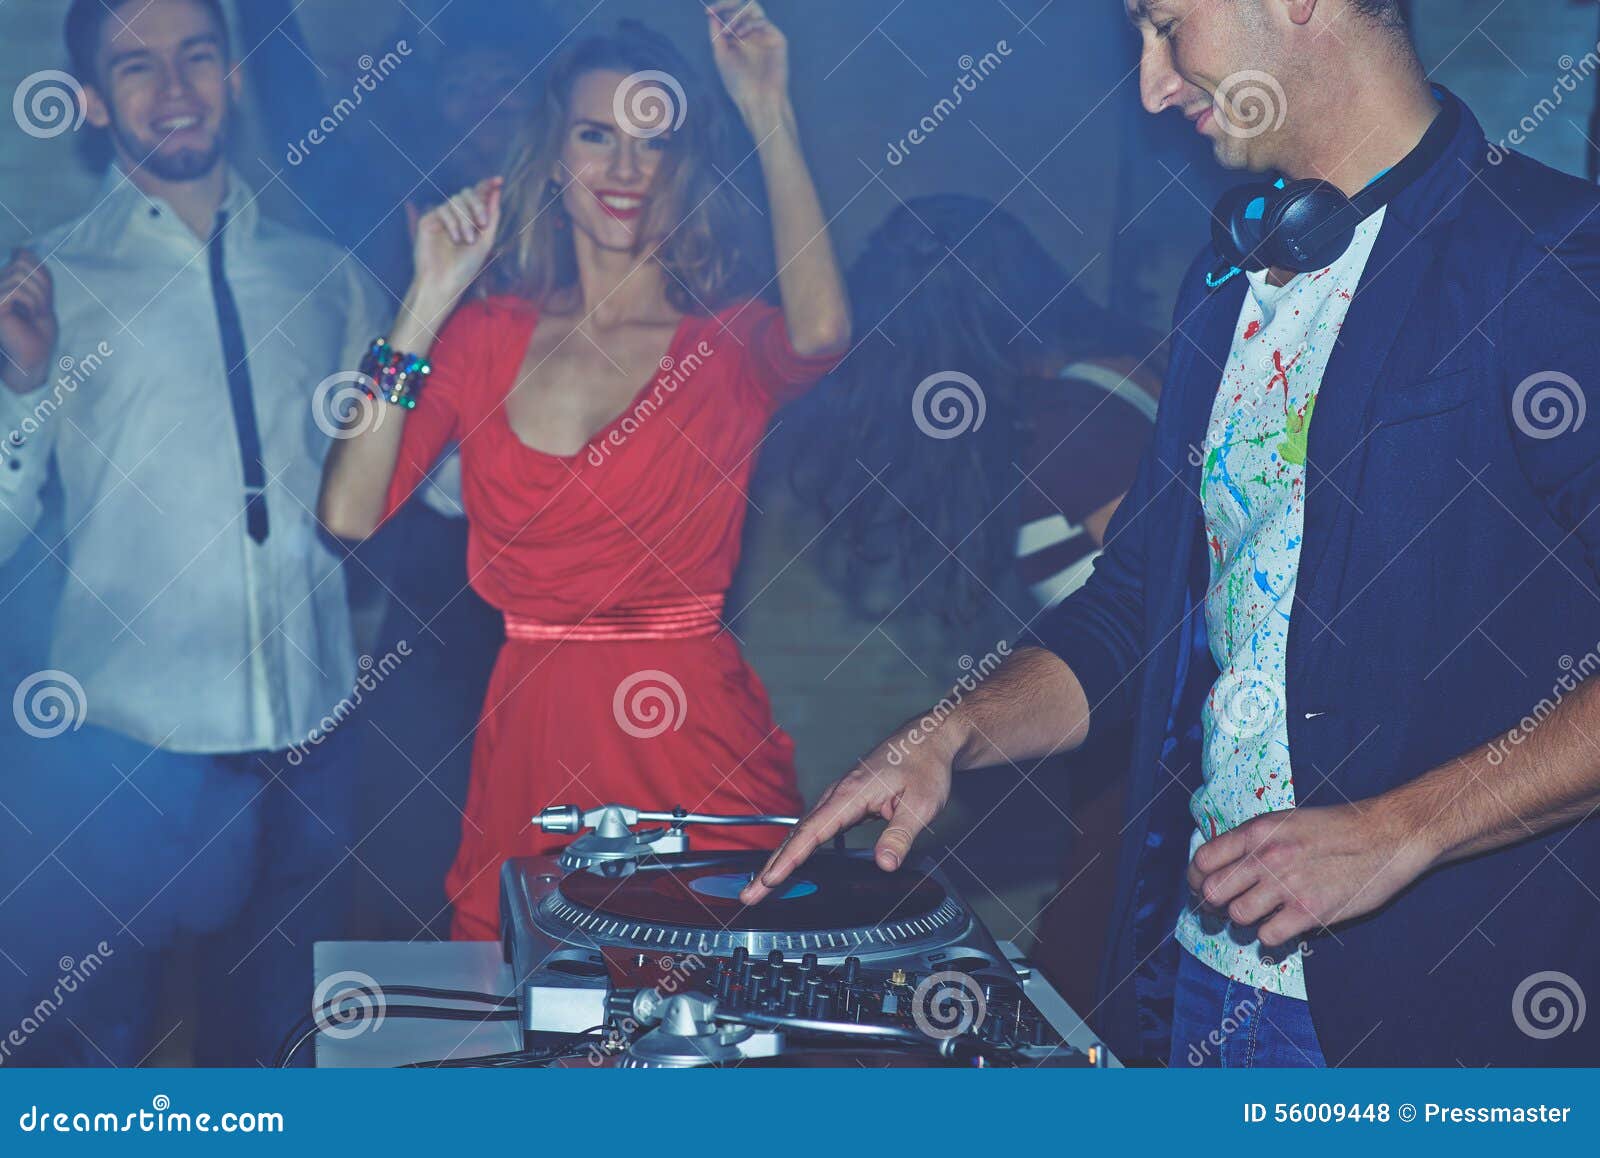 So funky stock photo. Image of friend, dynamic, clubbing - 56009448